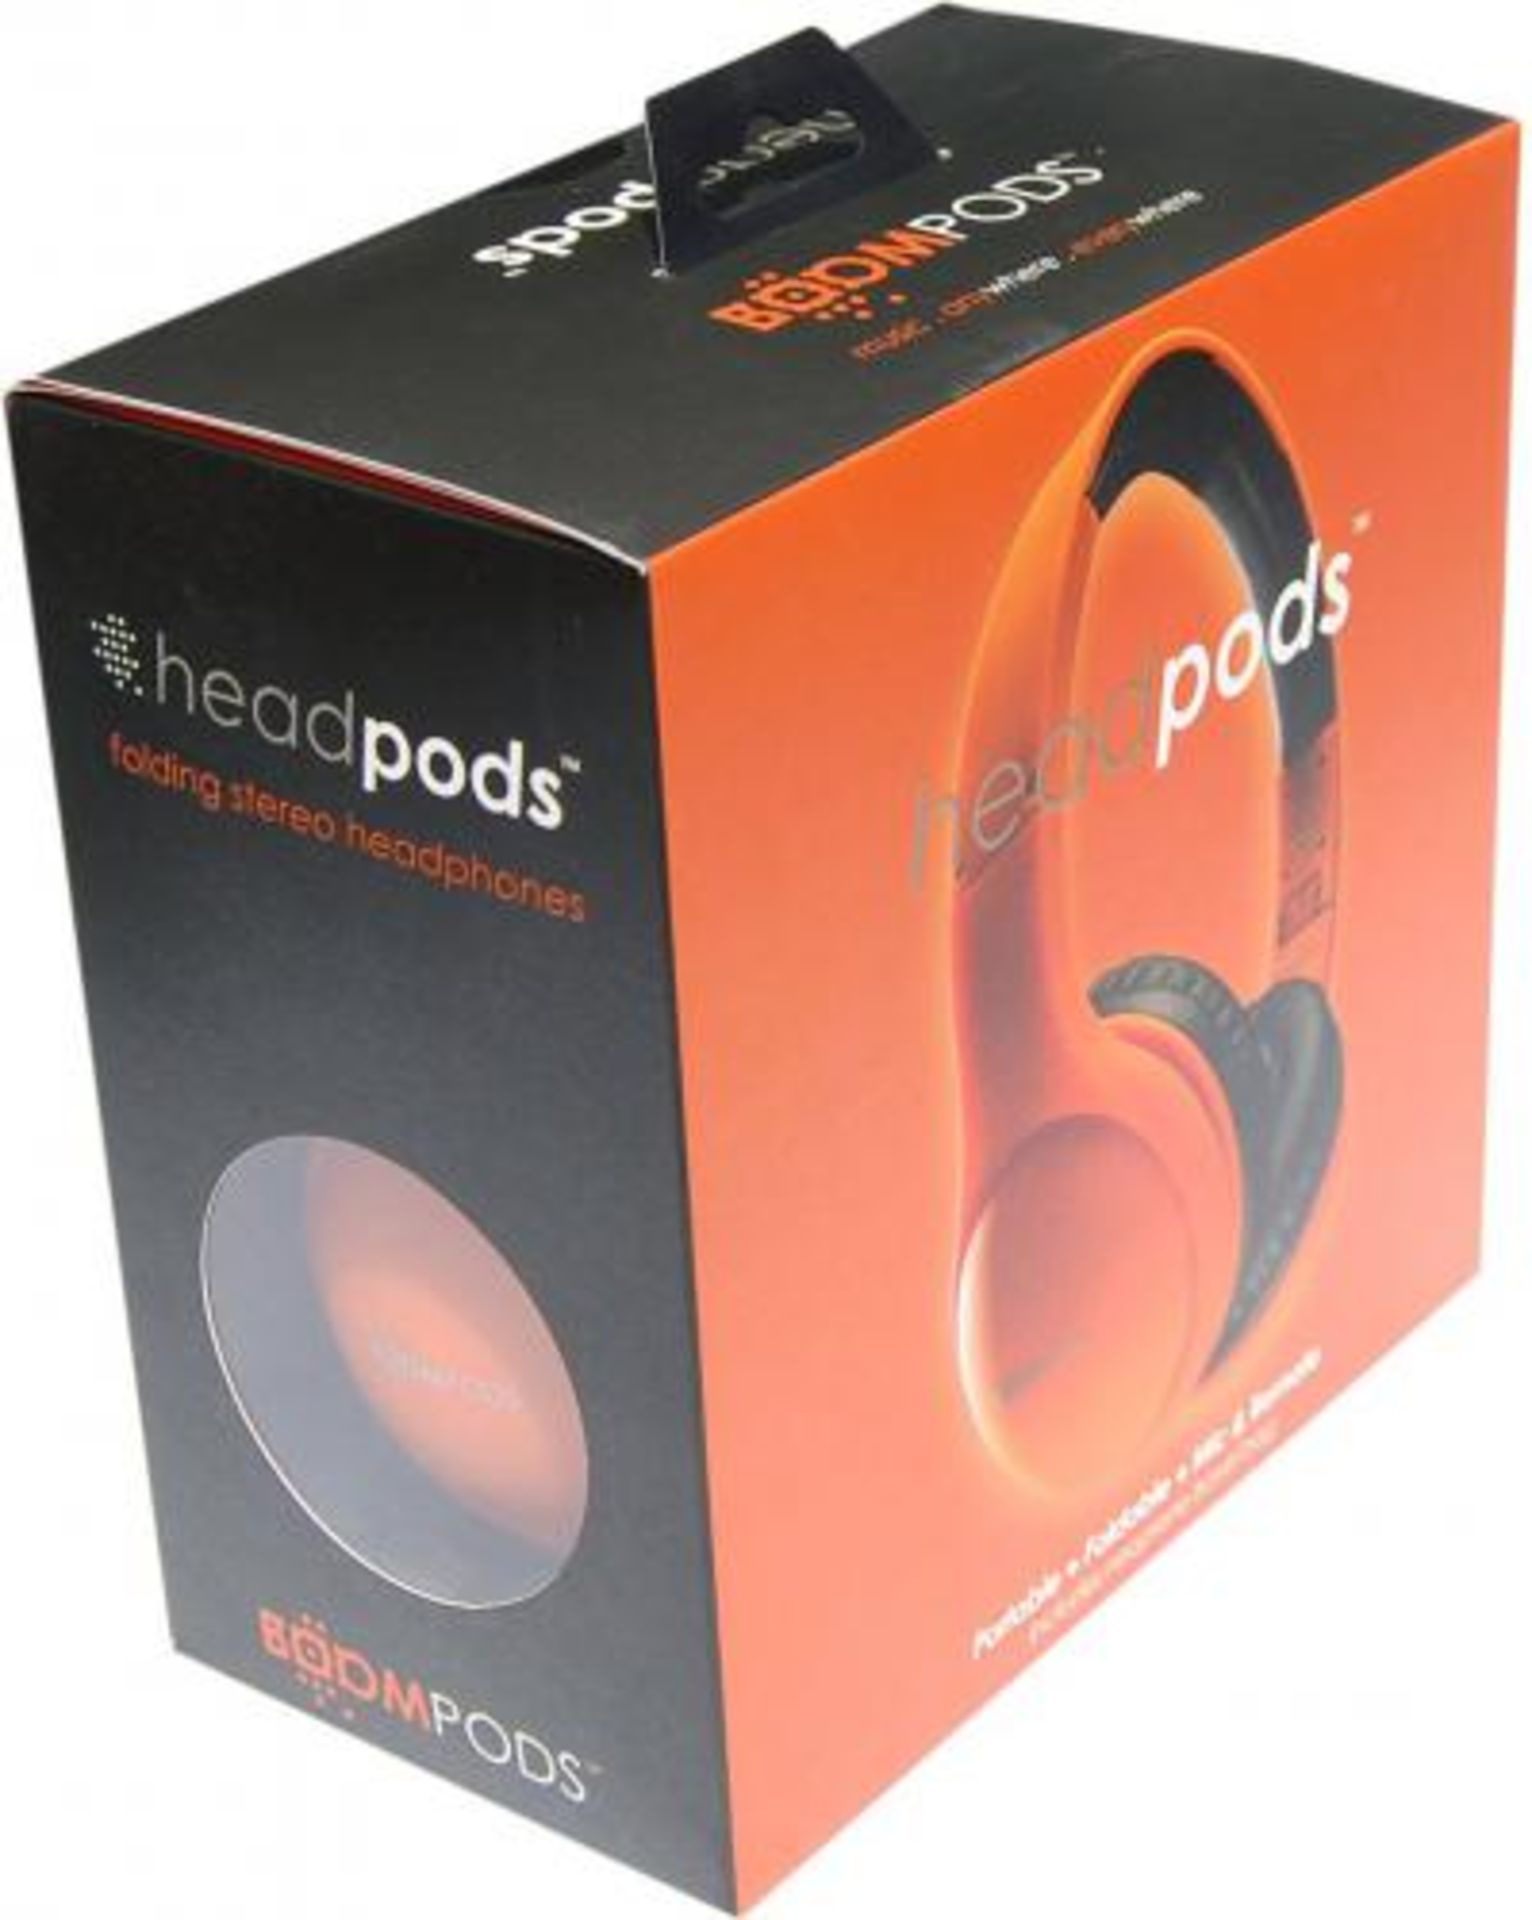 V *TRADE QTY* Brand New Boom Pods Headpods Foldable Soft Touch Over Ear Stereo Headphones With - Image 2 of 2